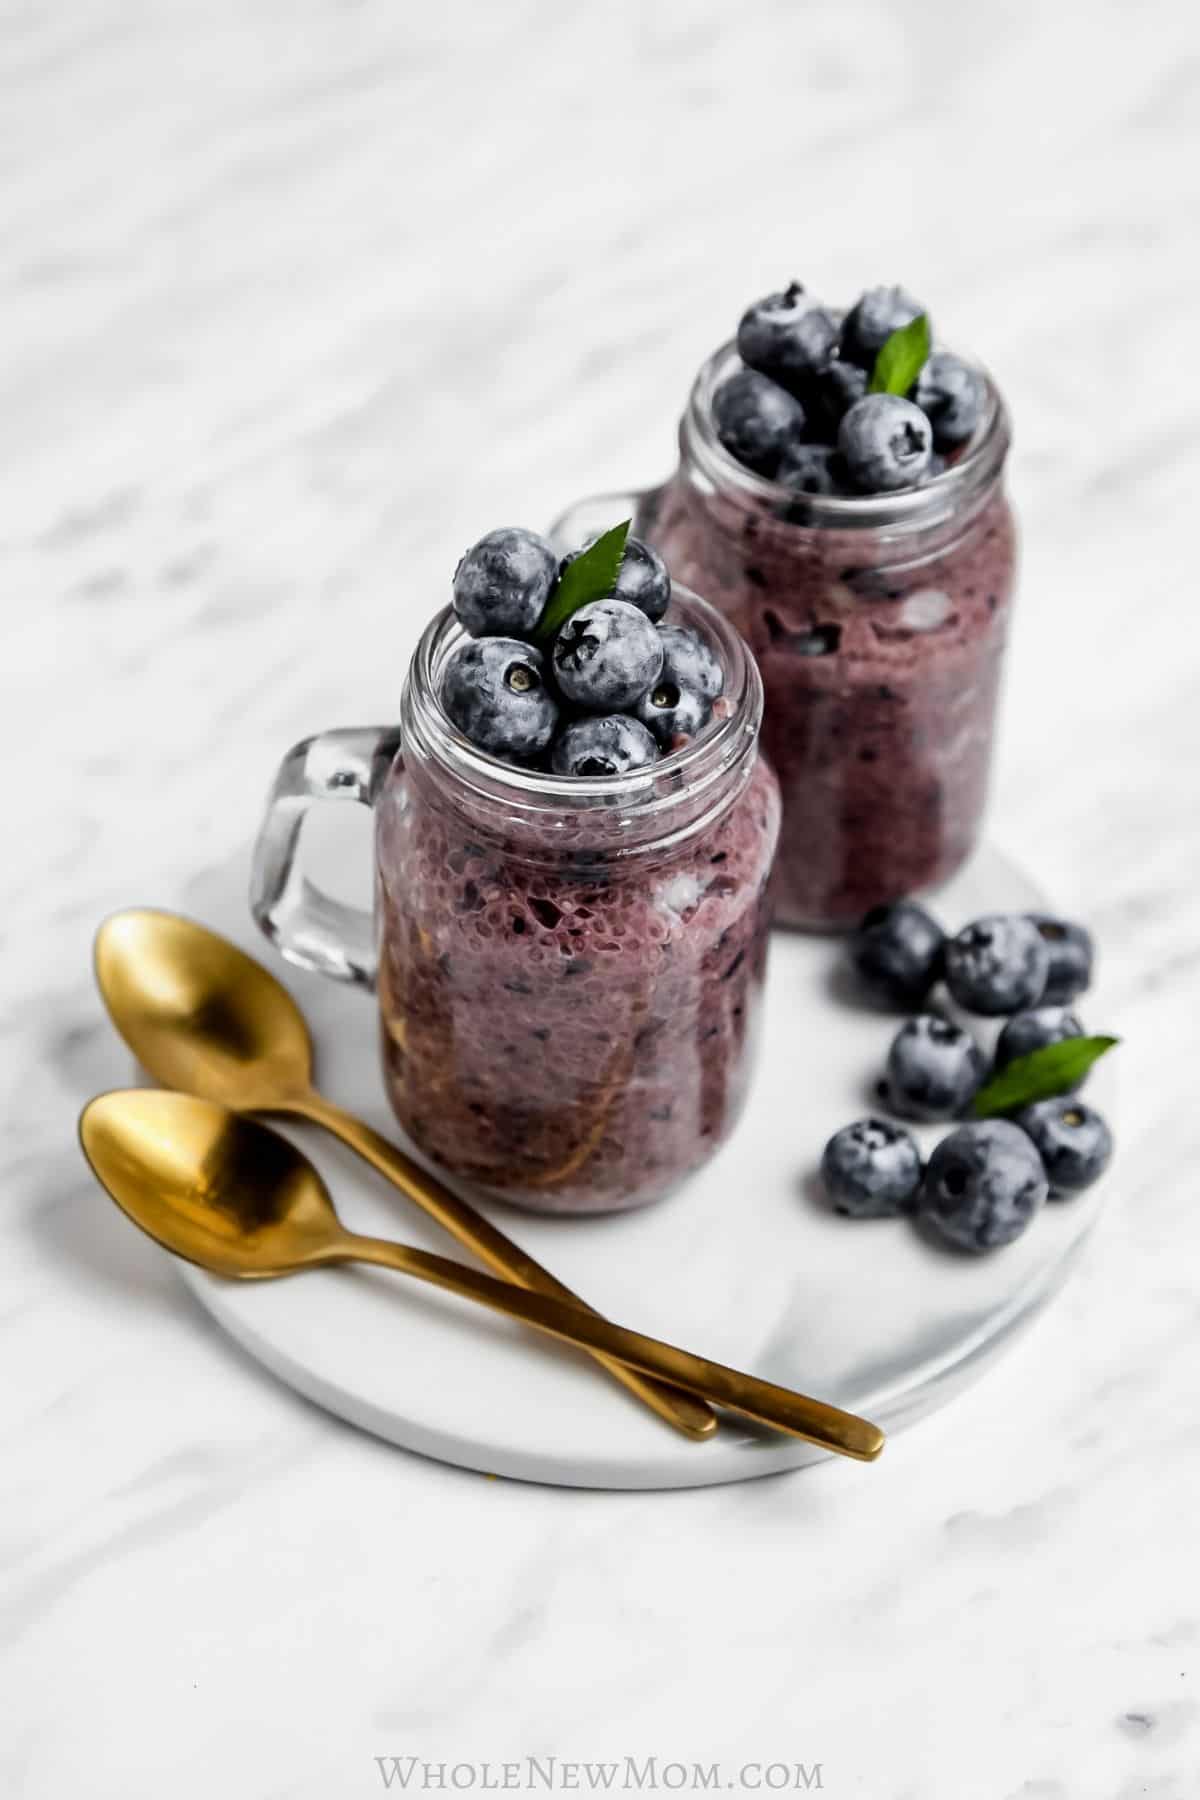 25 Healthy Recipes with Berries for Spring and Summer - The Beauty May